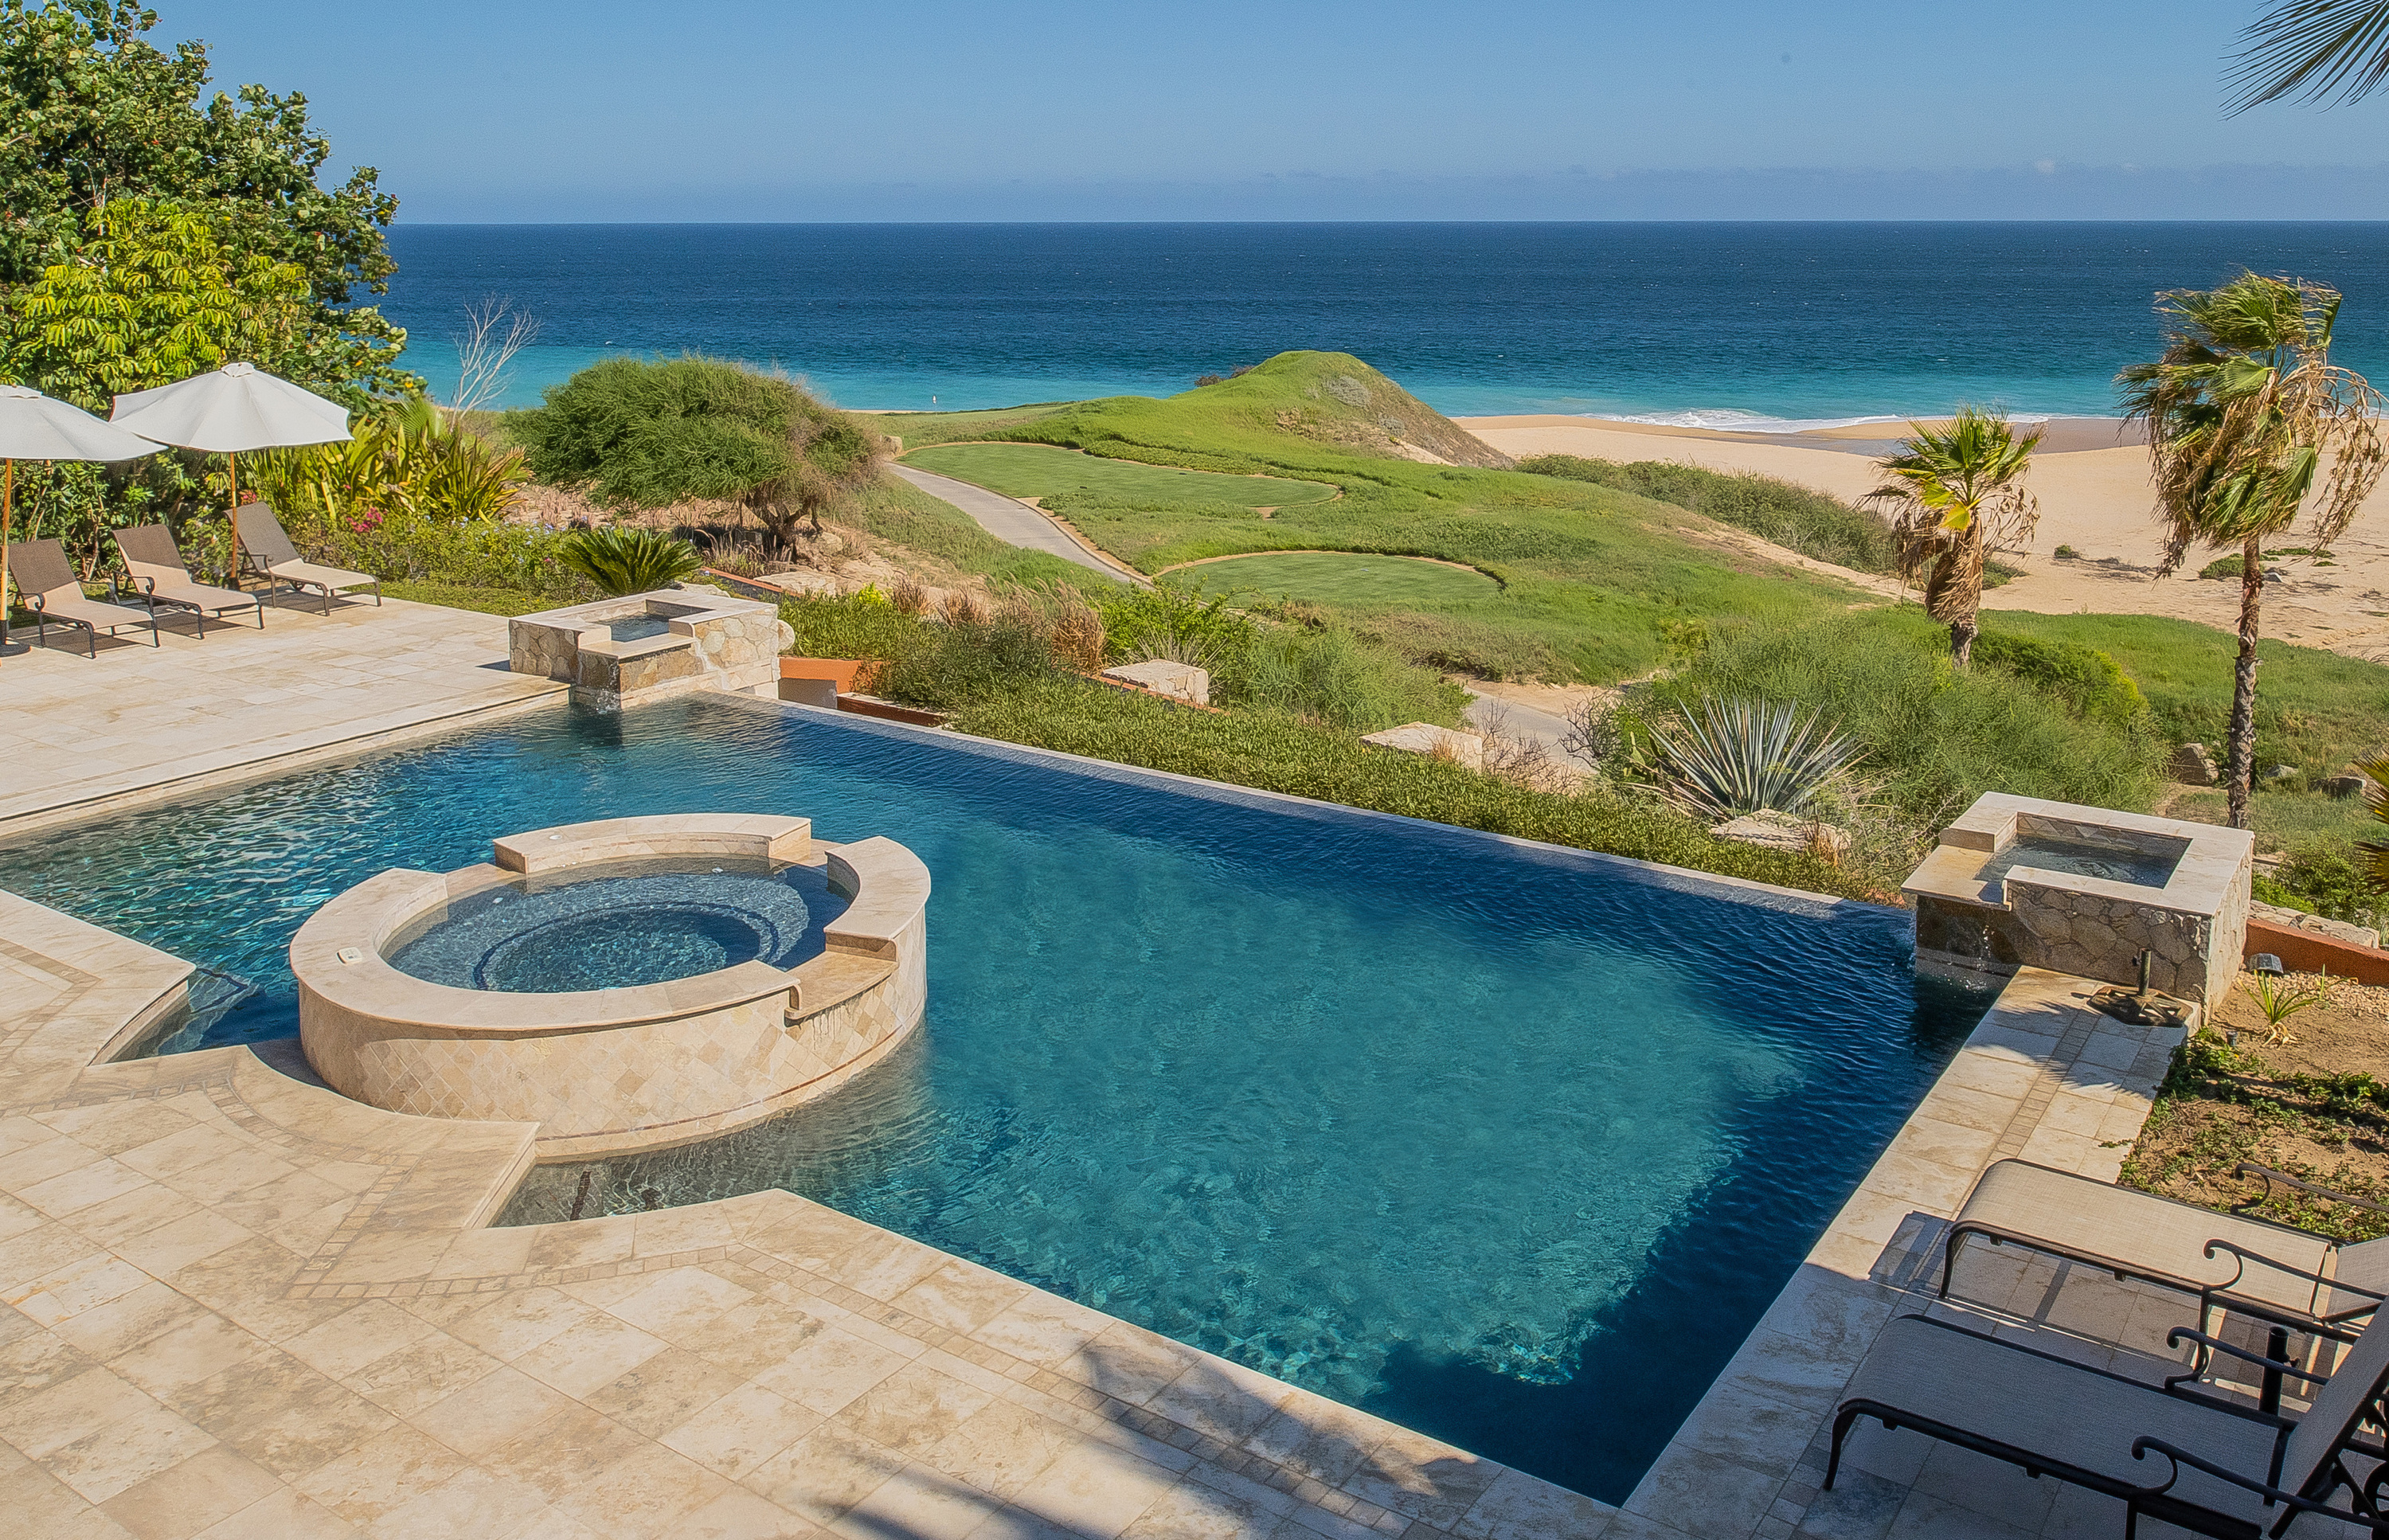 Infinity pool and jacuzzi with breathtaking ocean view